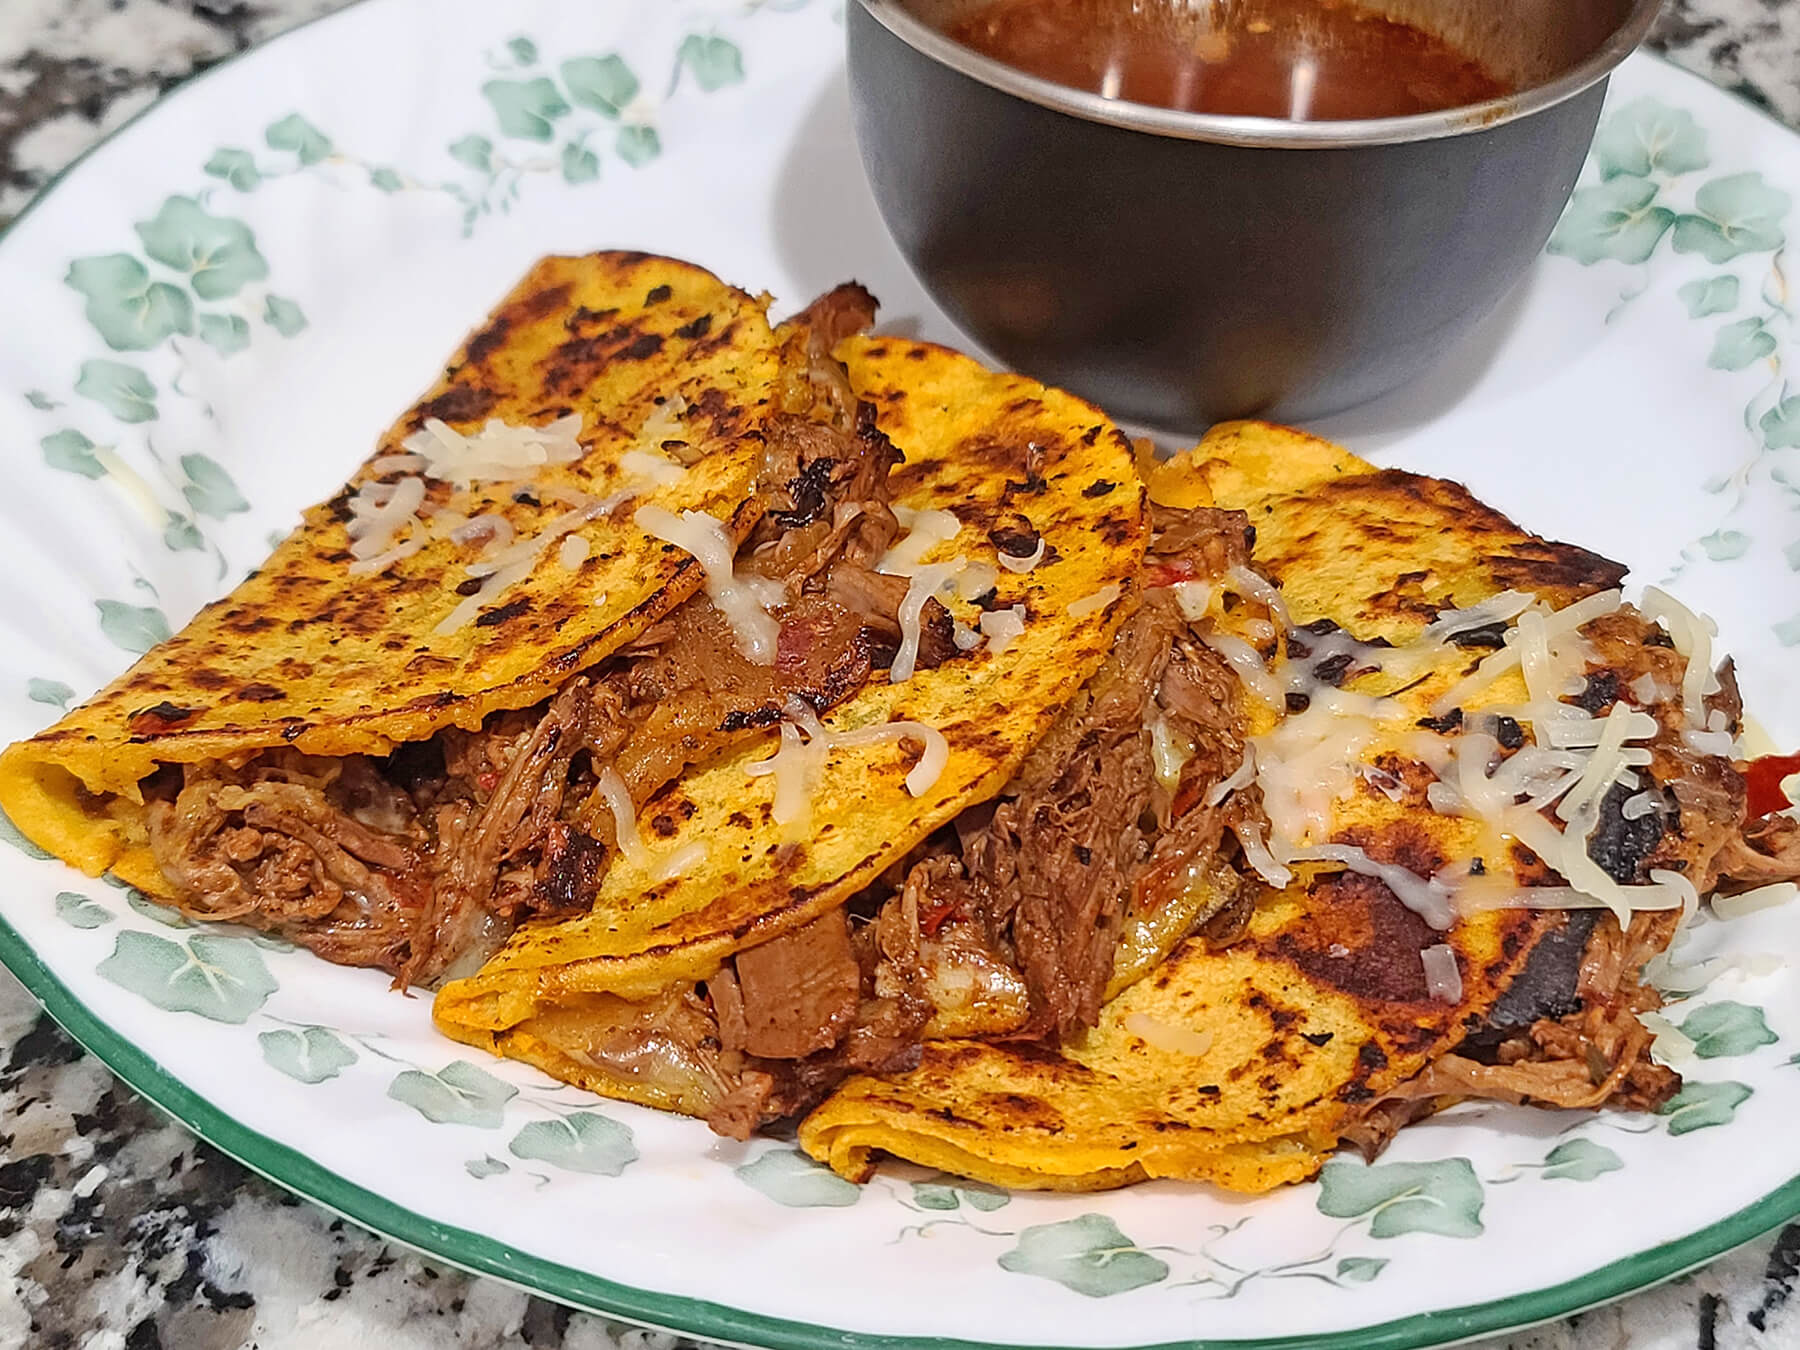 These tacos must 'birria' your next new dinner recipe - Spice Up Your Life